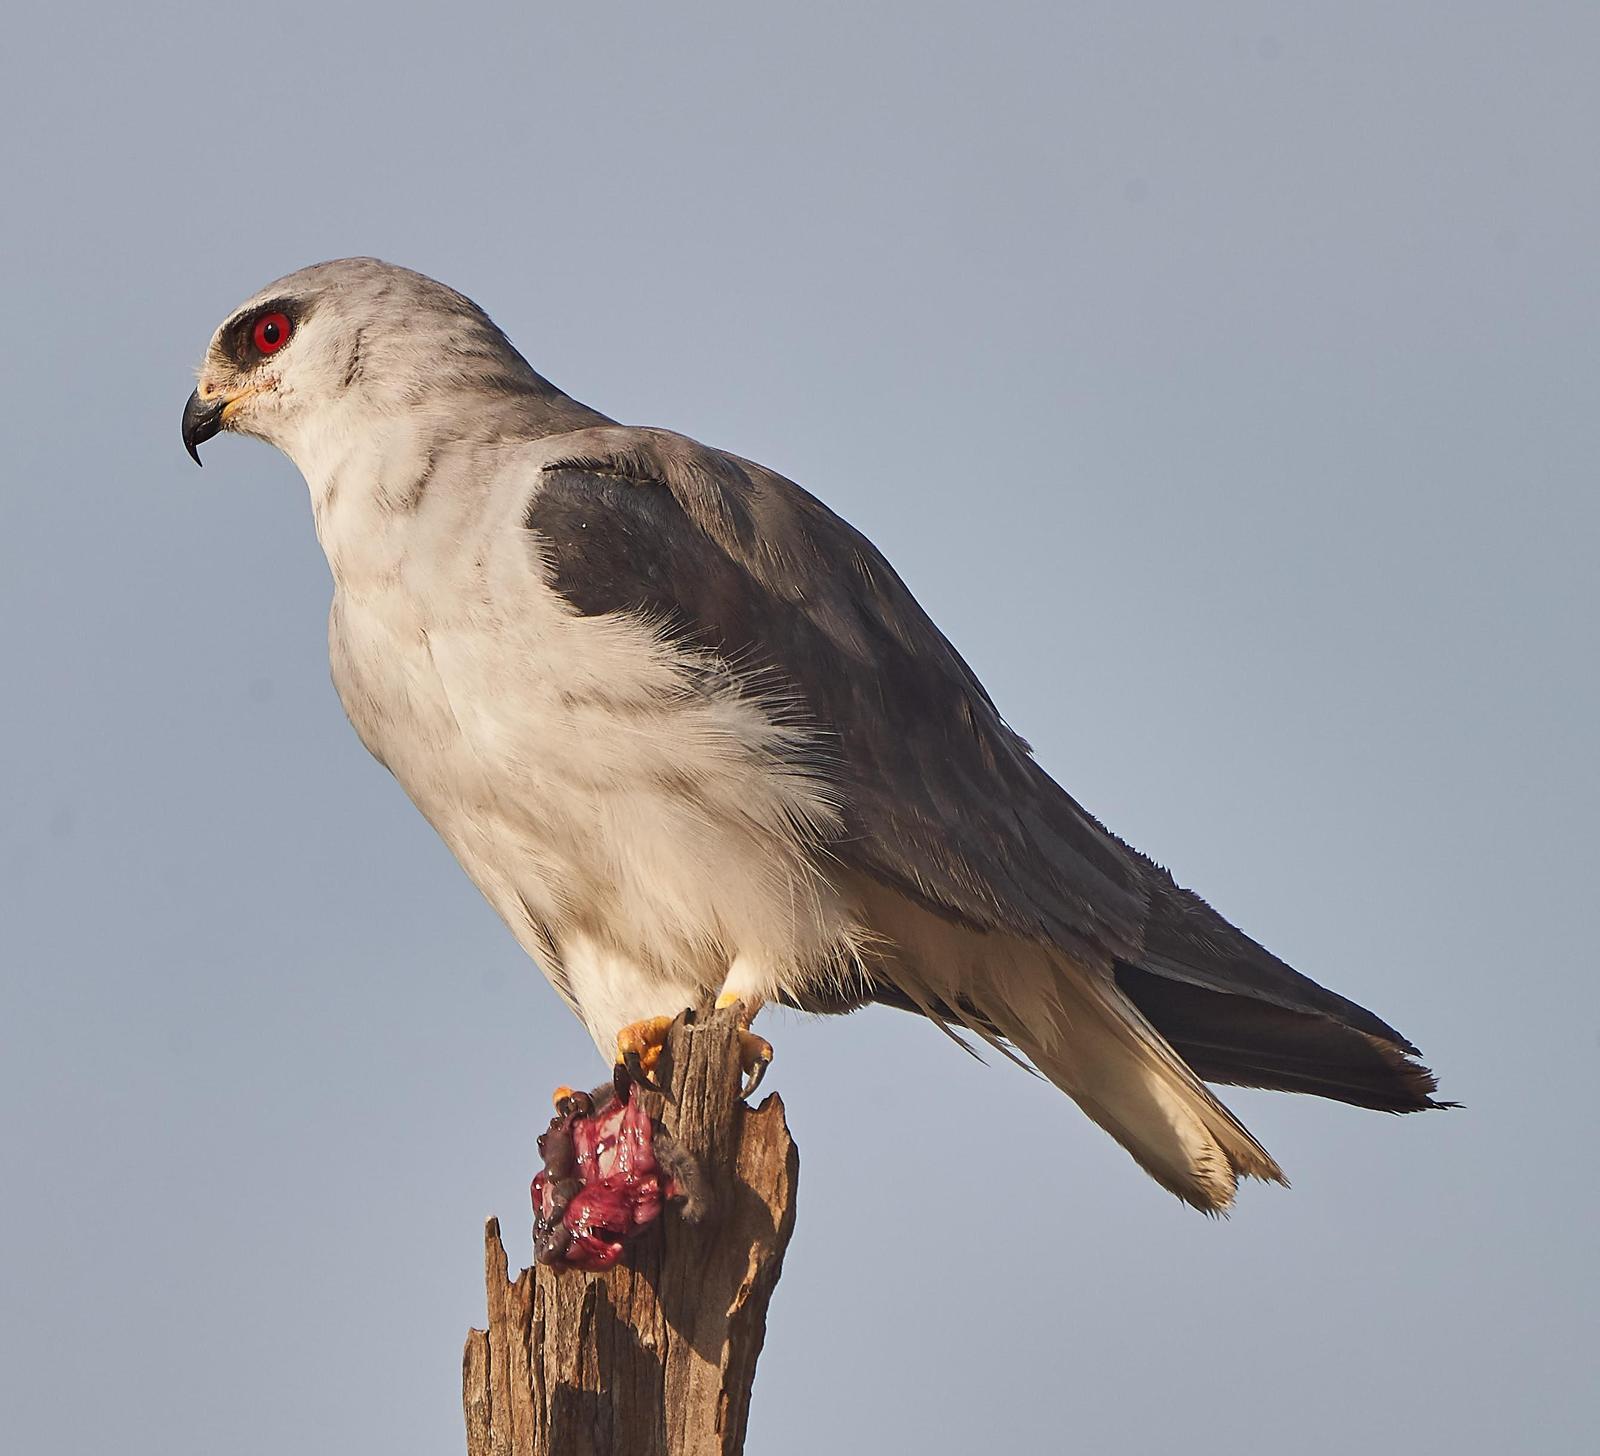 Black-winged Kite Photo by Steven Cheong